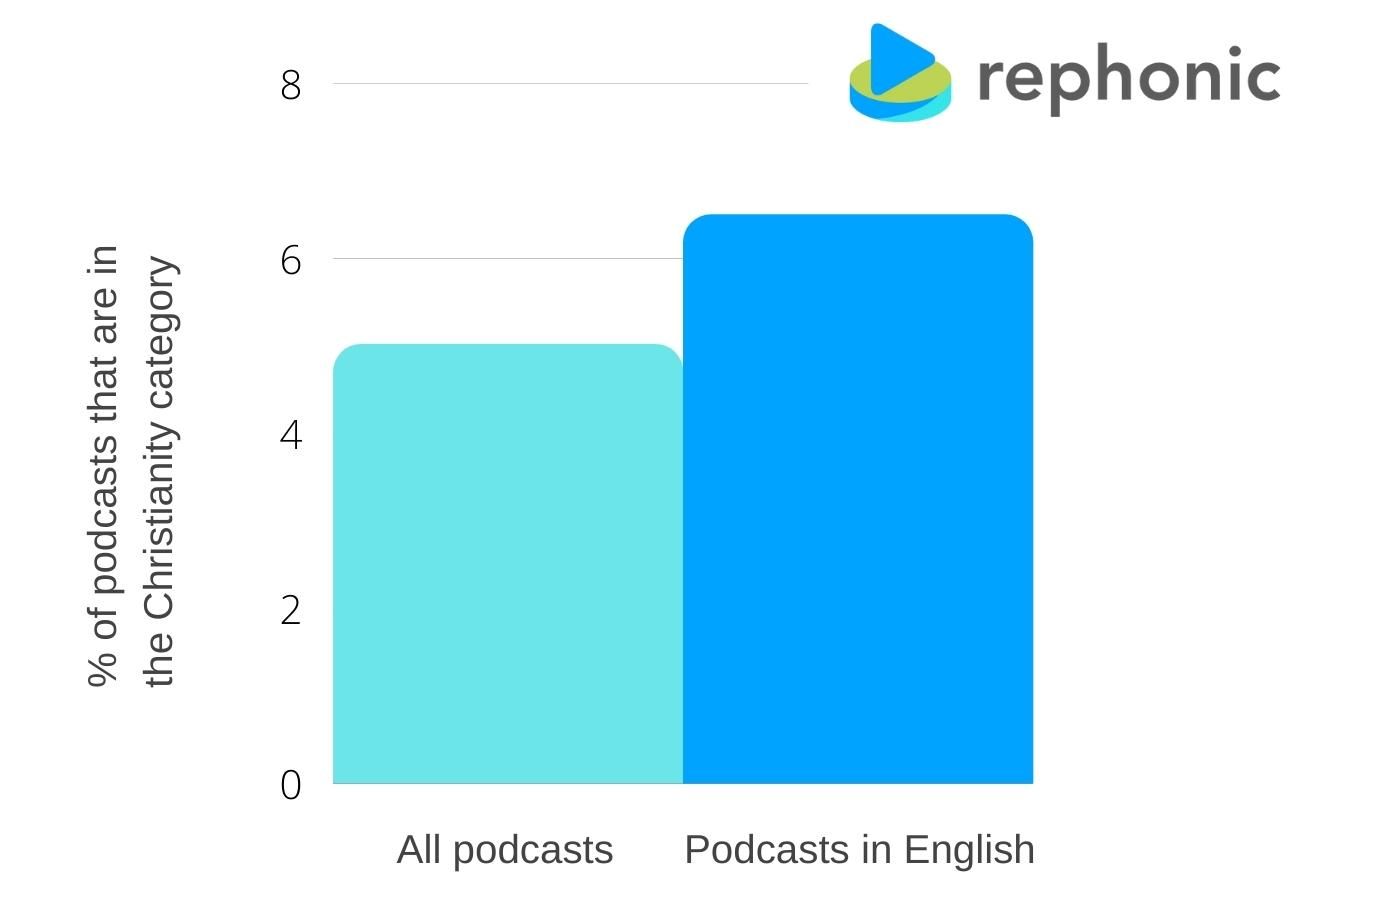 Graph showing the popularity of Christianity podcasts in English